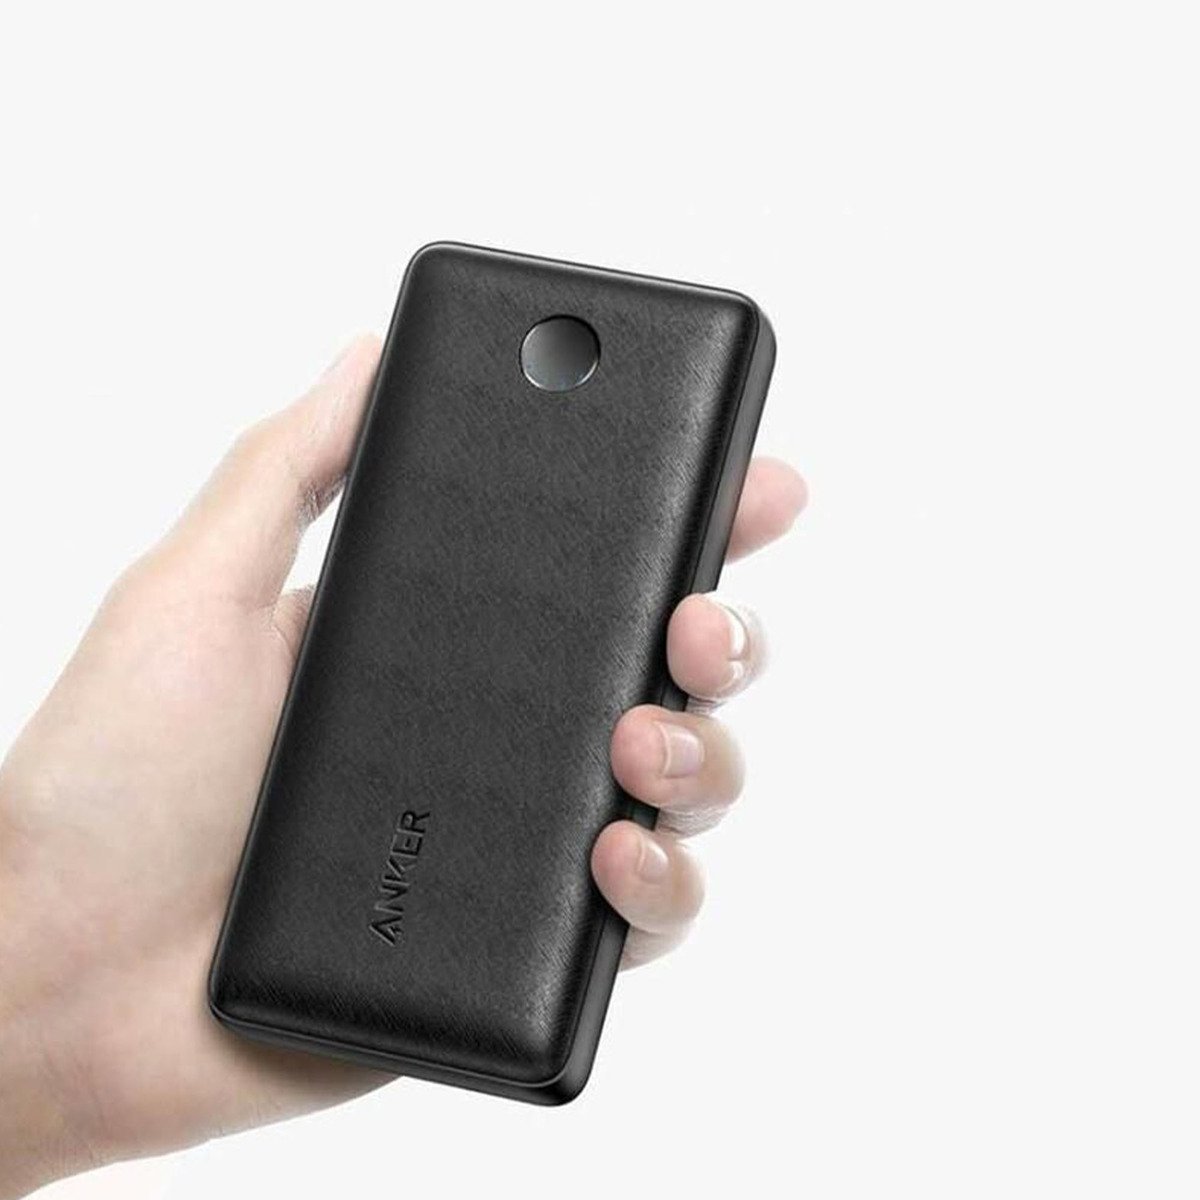  someone is holding black Anker PowerCore Select 20000mAh Power Bank  